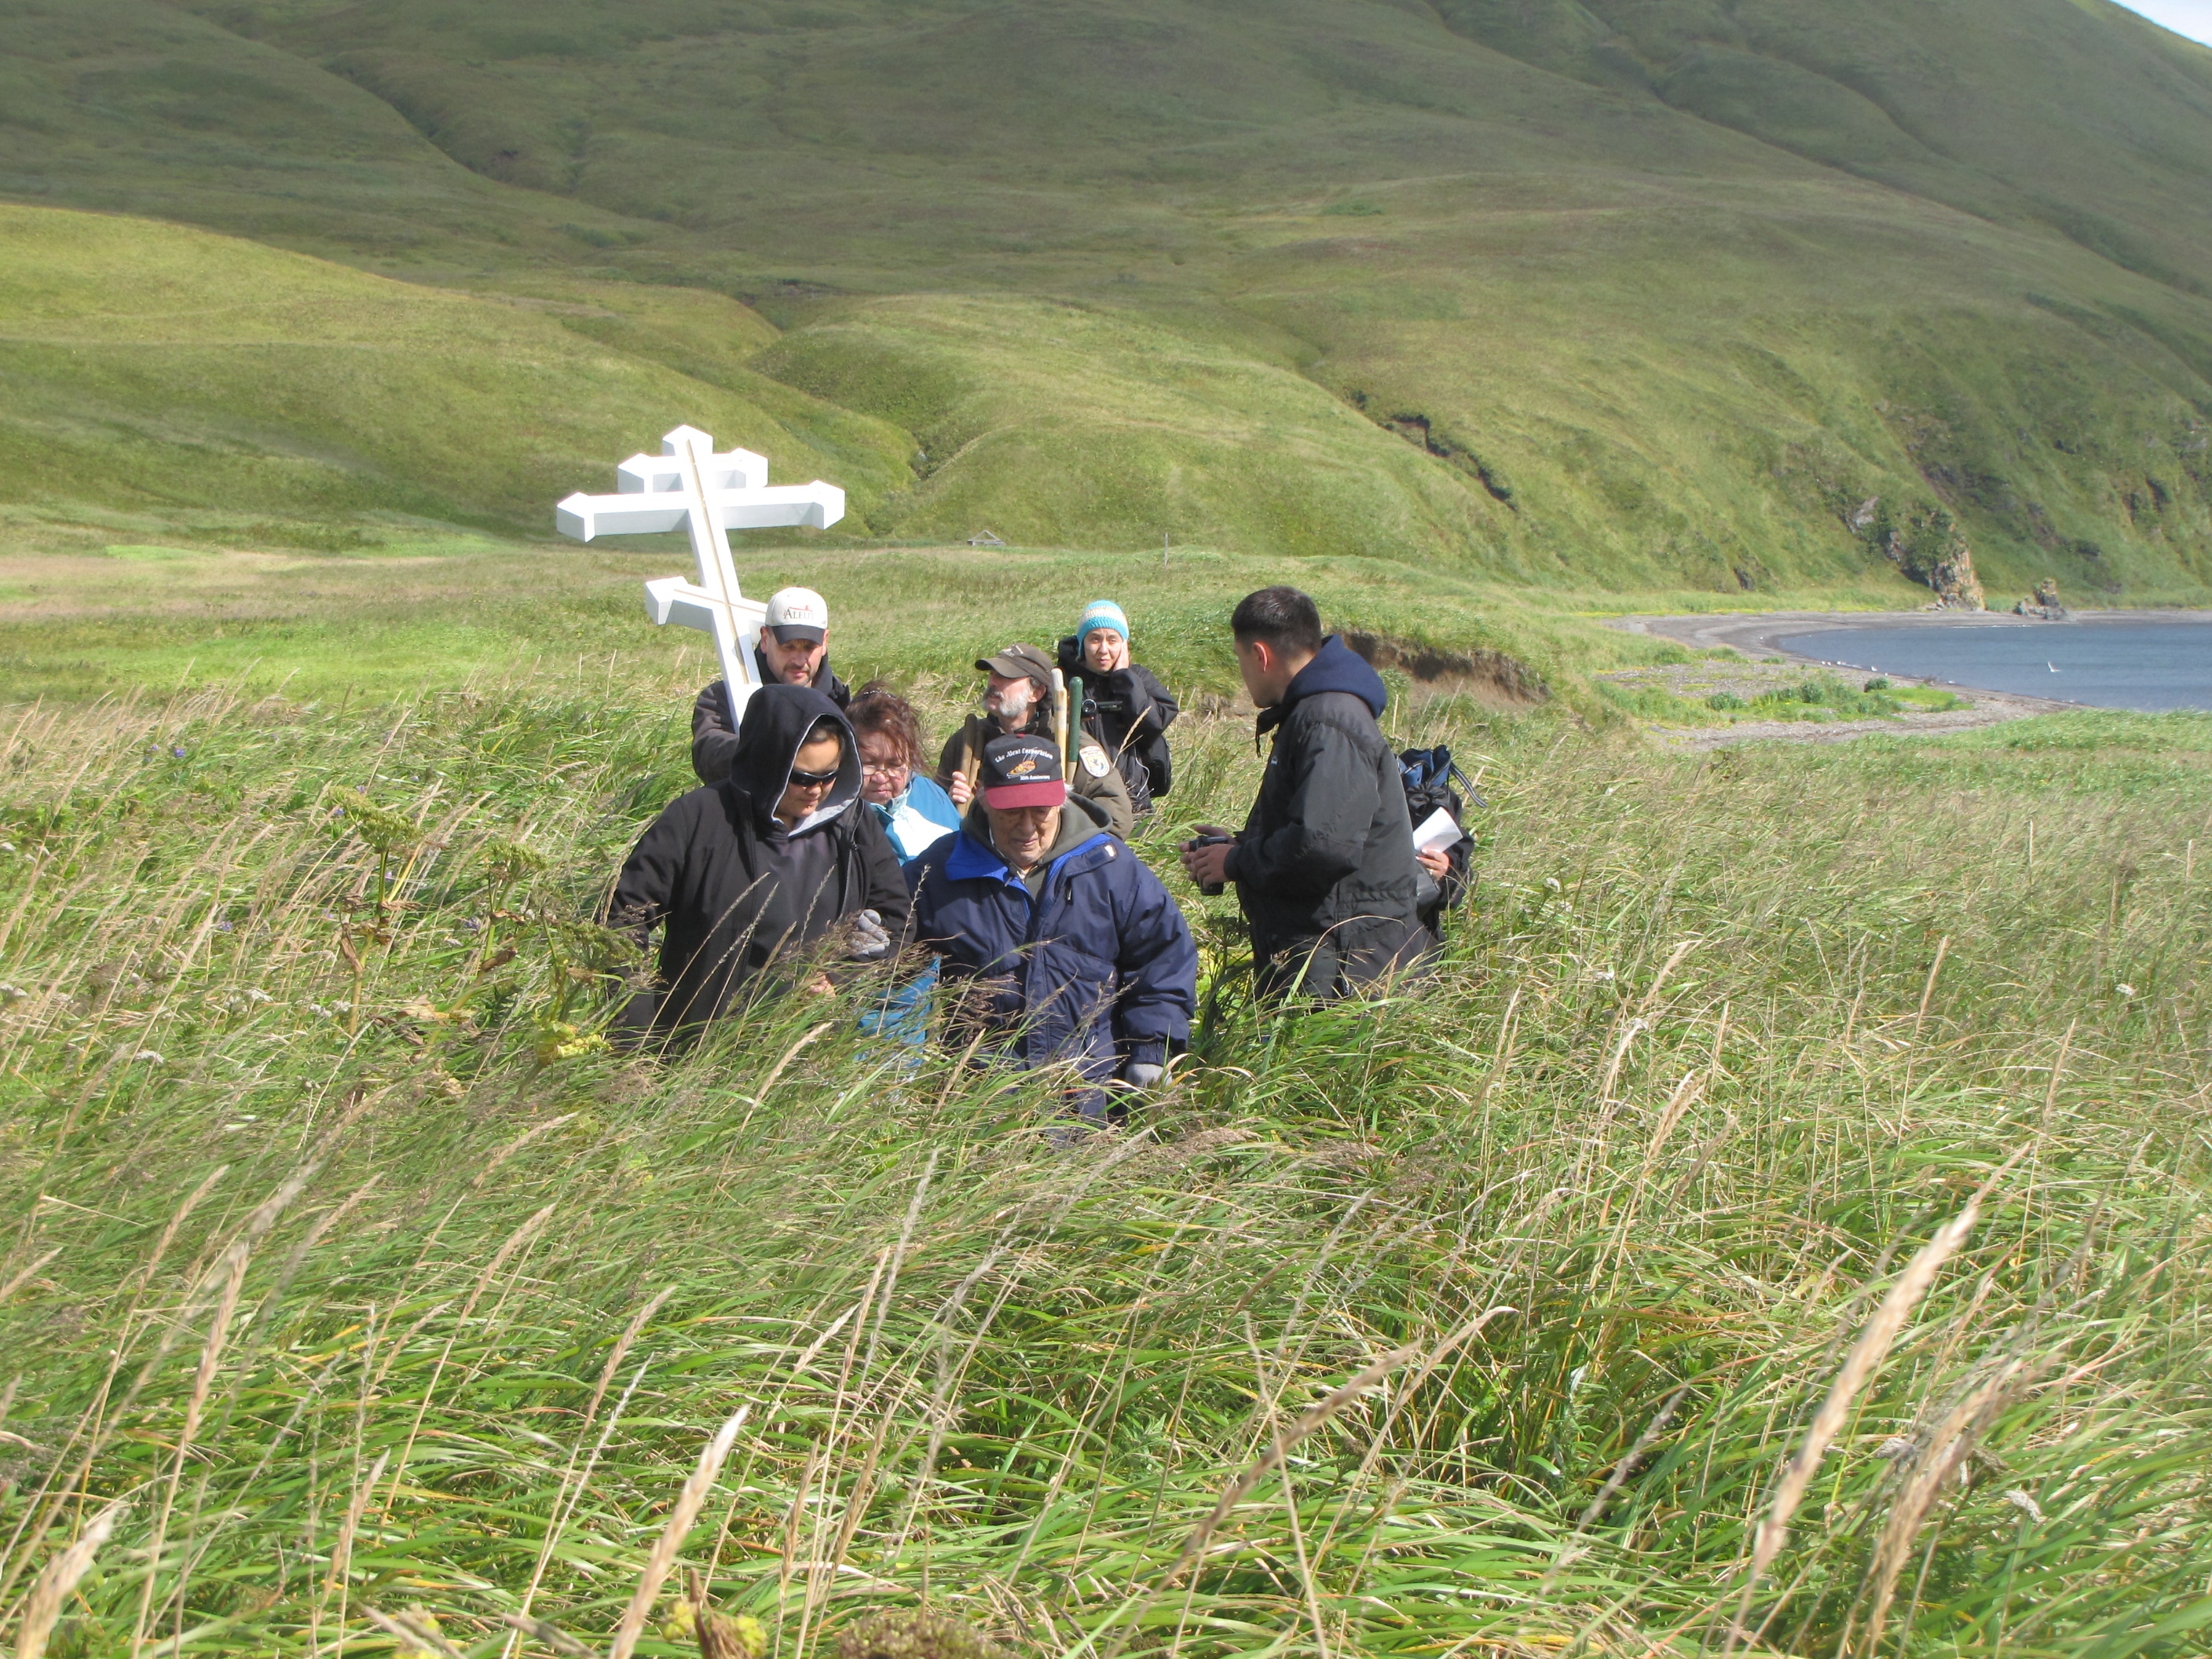 Group of people around a Russian cross in tall grass